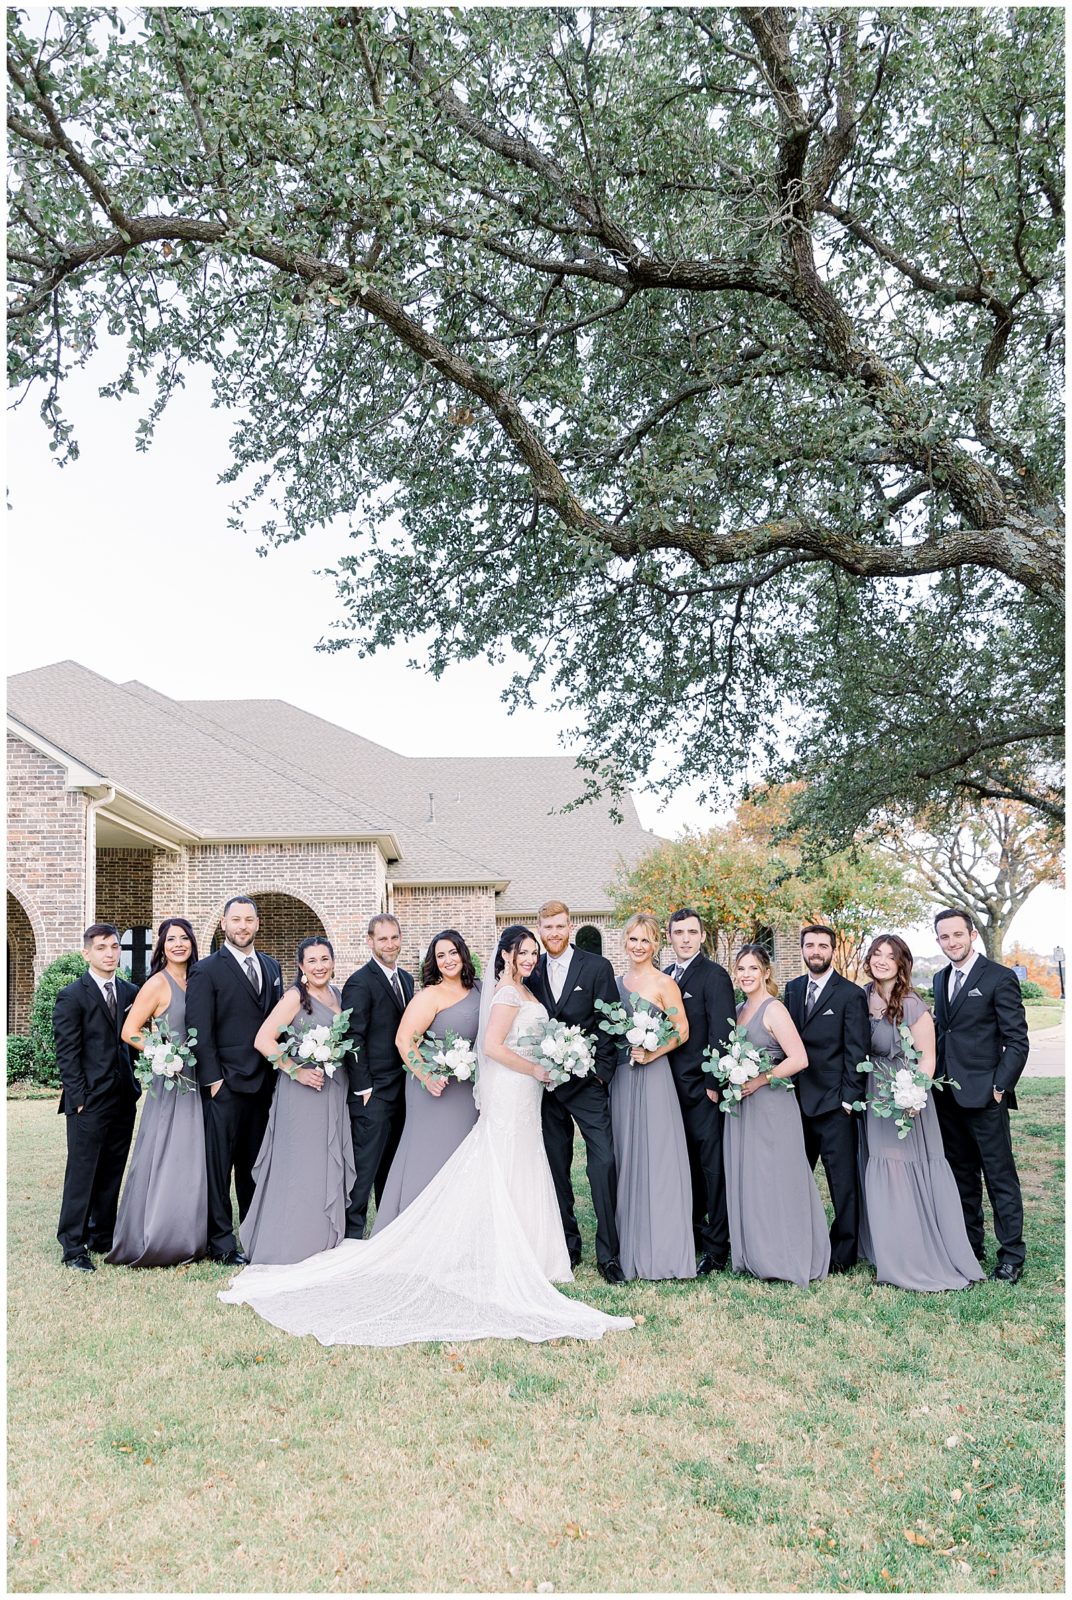 Photographer has Worked at Your Venue